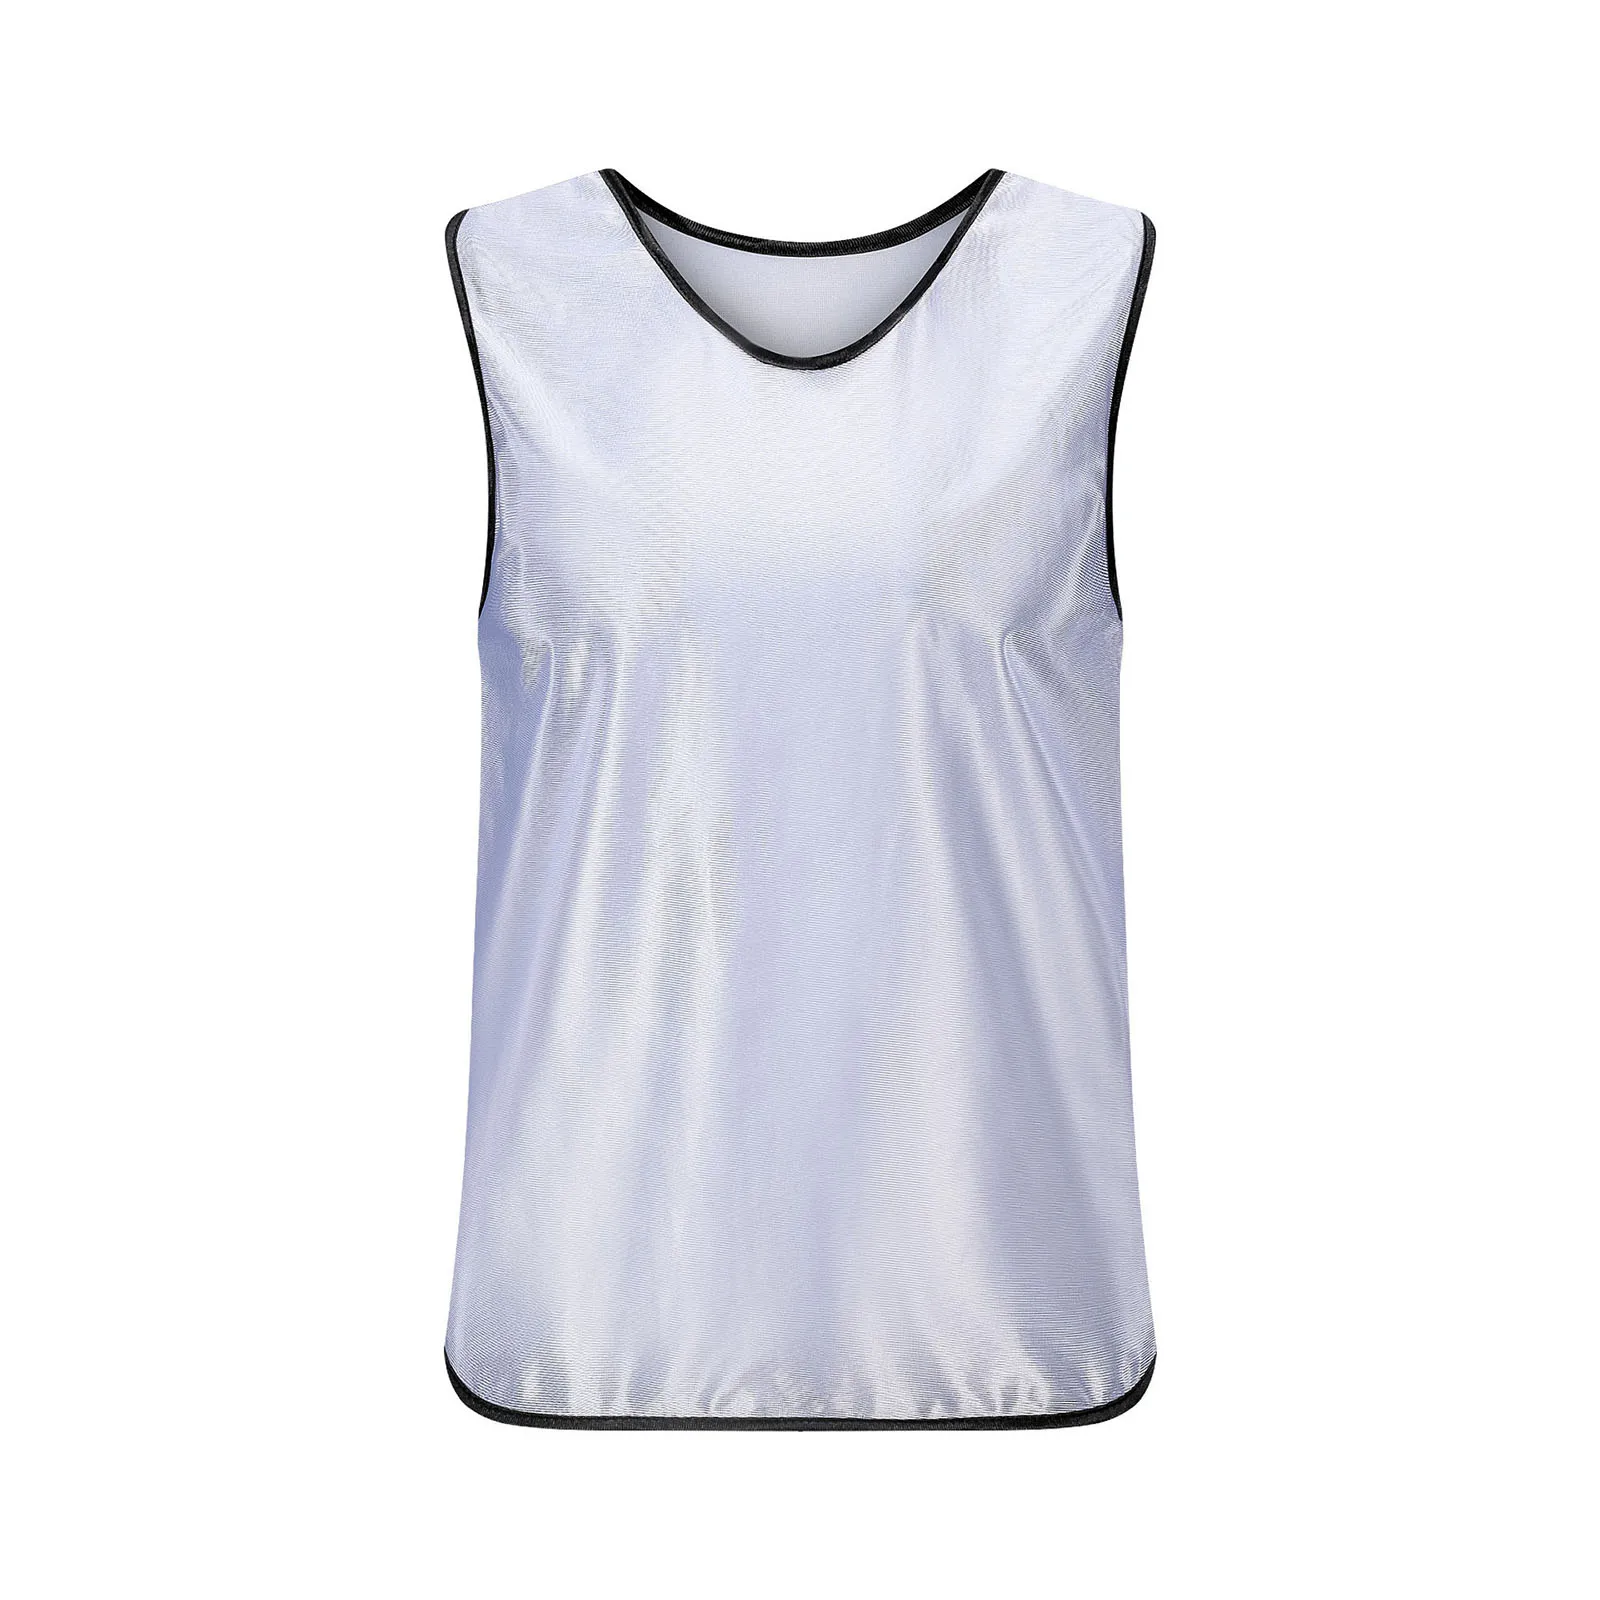 Jerseys Football Vest Quick Drying Soccer Pinnies Team Sports Comfortable Fast Drying Football Vest Practice Vests